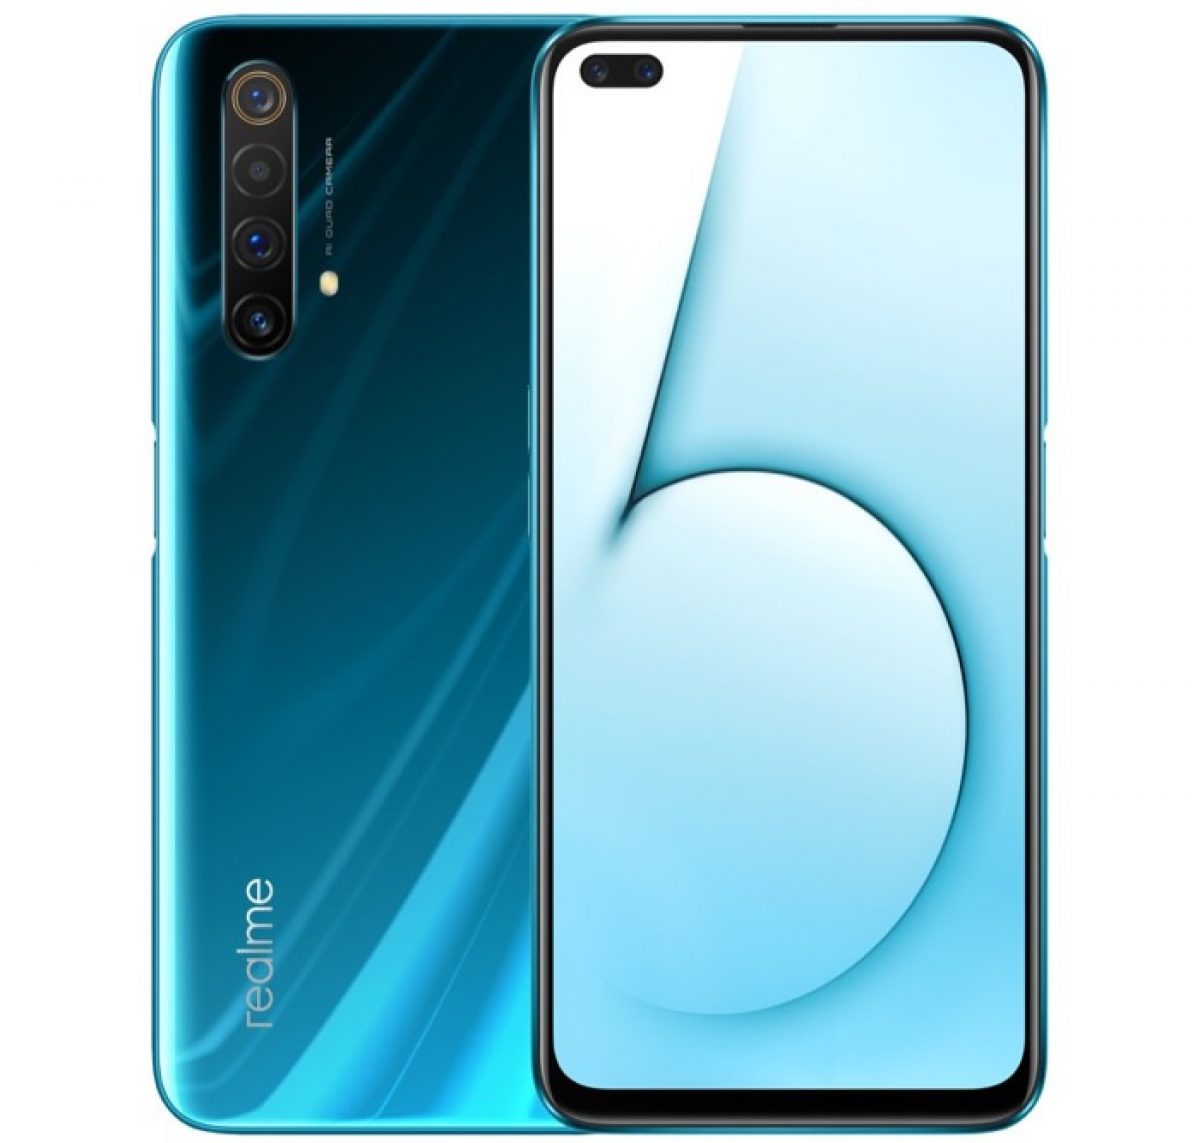 How to Root Realme X50 Pro 5G